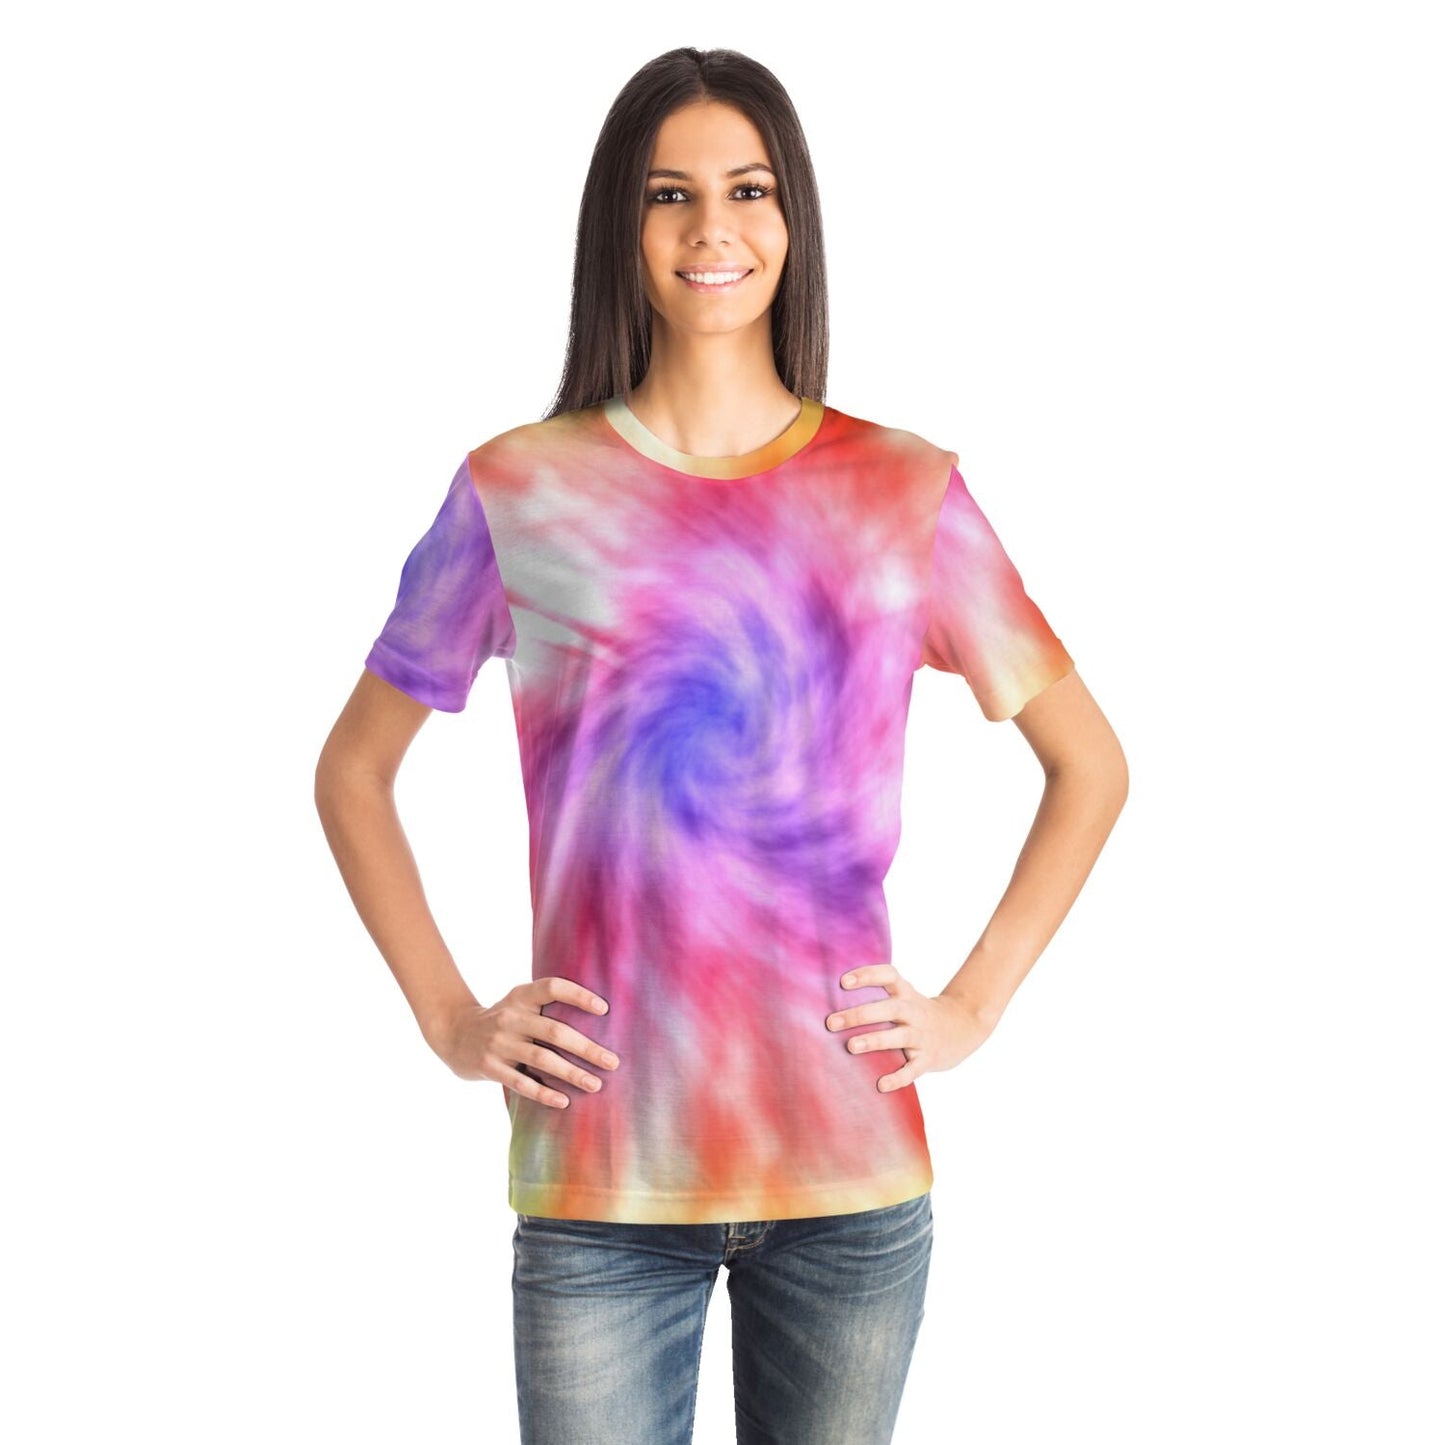 Tie Dyes - Yellow and Oranges (Red River Gorge)